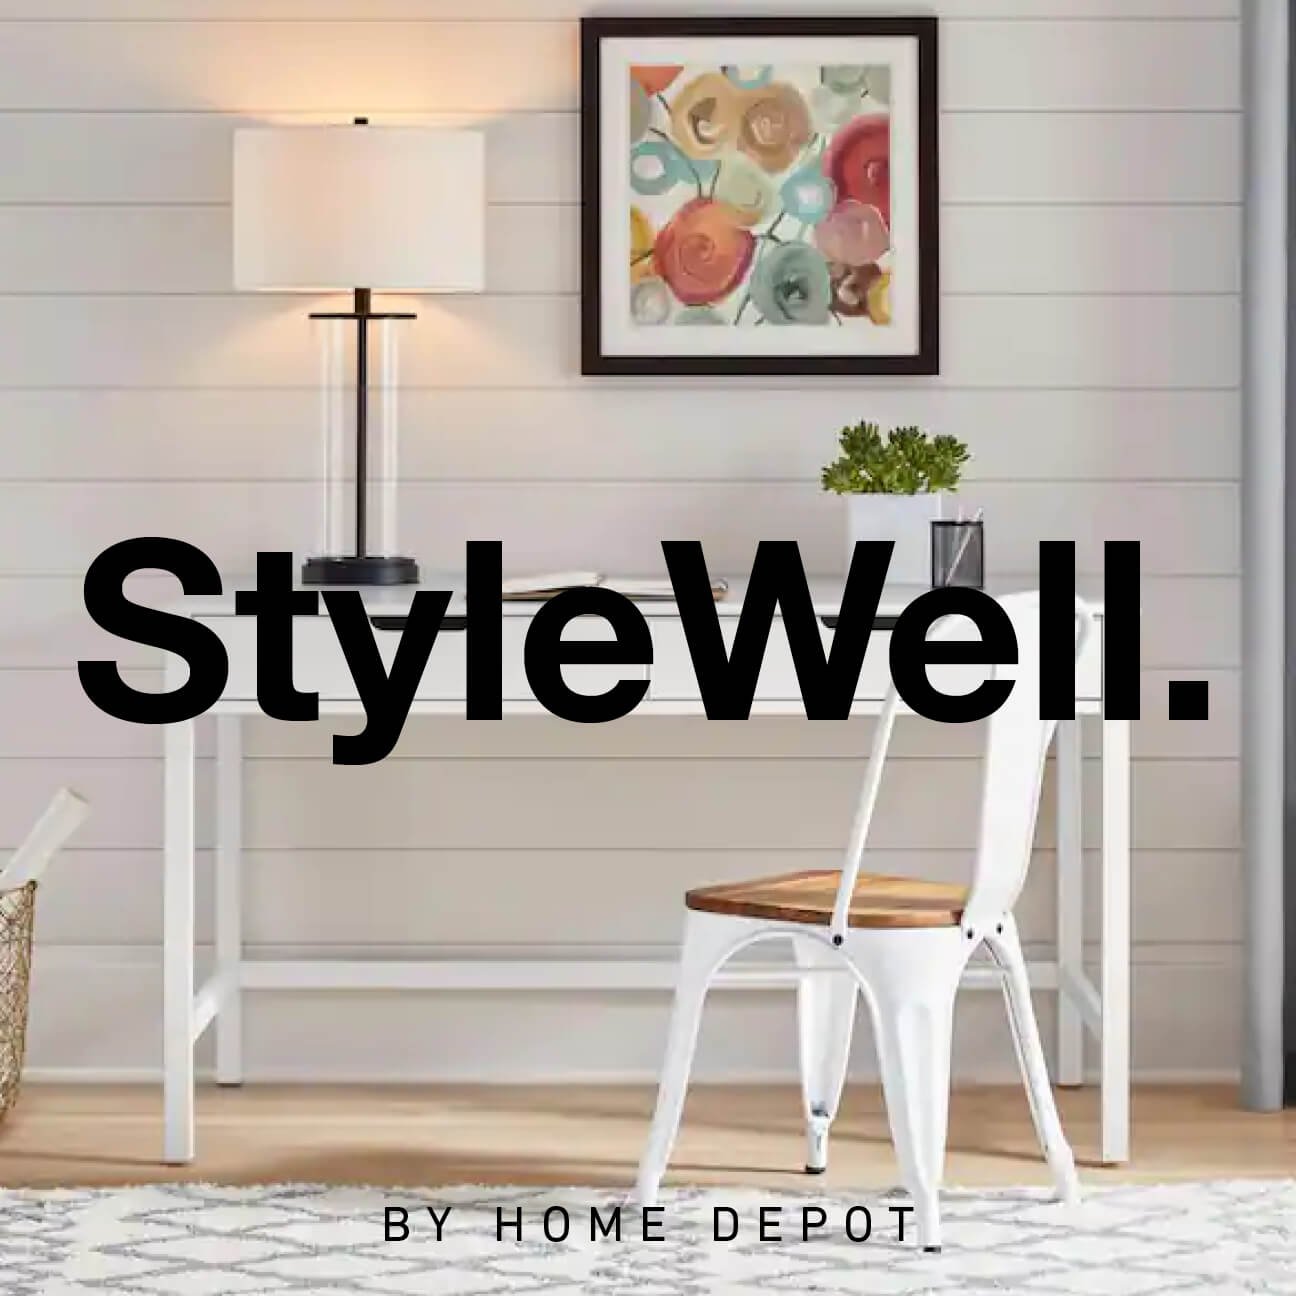 StyleWell - Home Depot